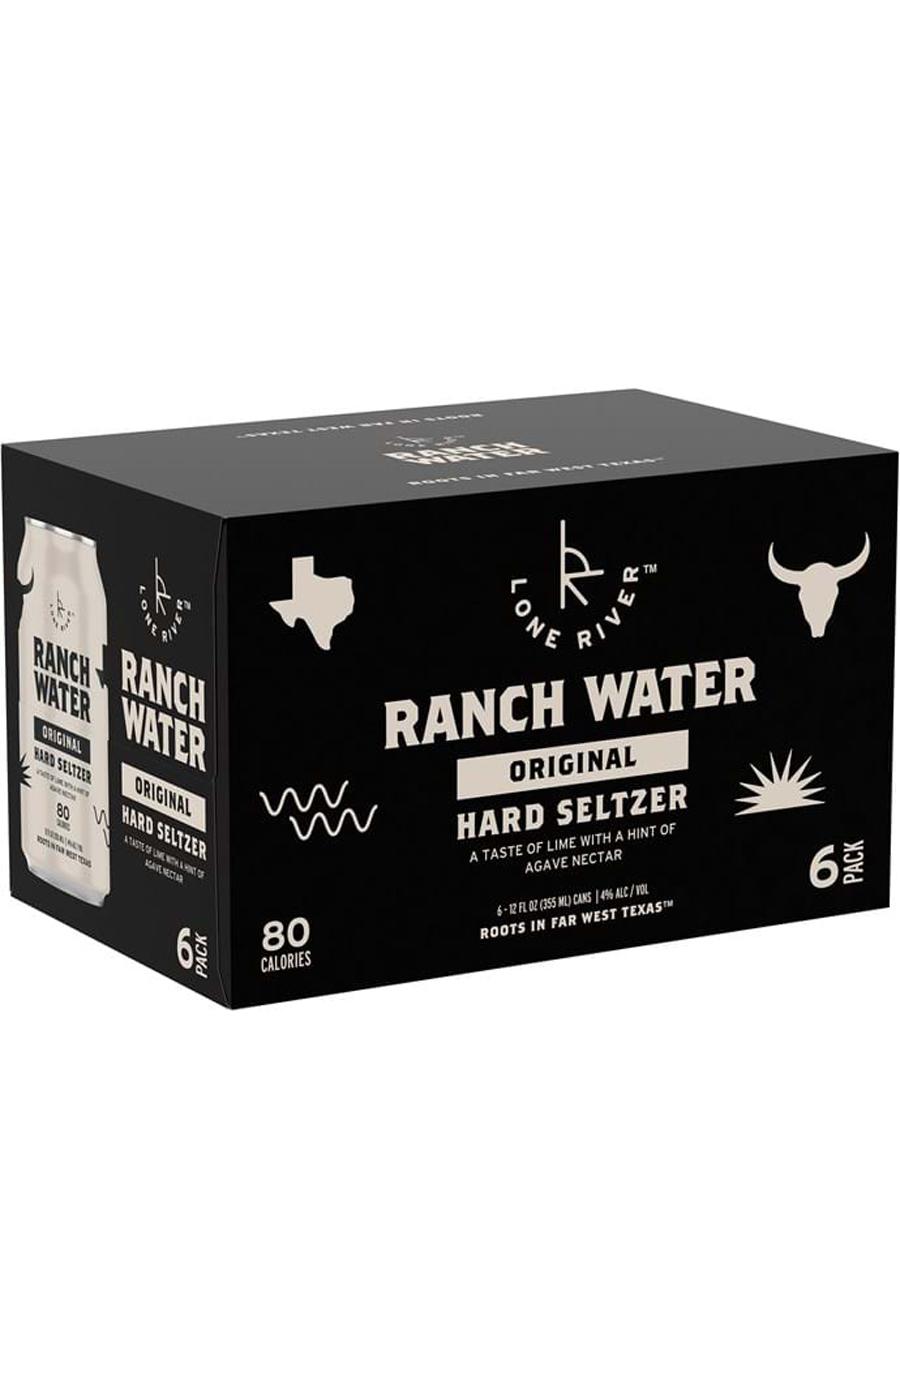 Lone River Original Ranch Water Hard Seltzer 6 pk Cans; image 1 of 4